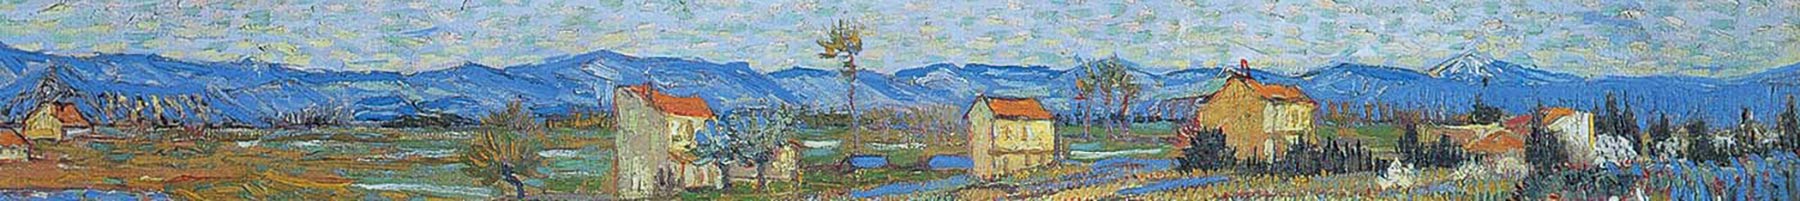 Van Gogh painting of houses and mountains